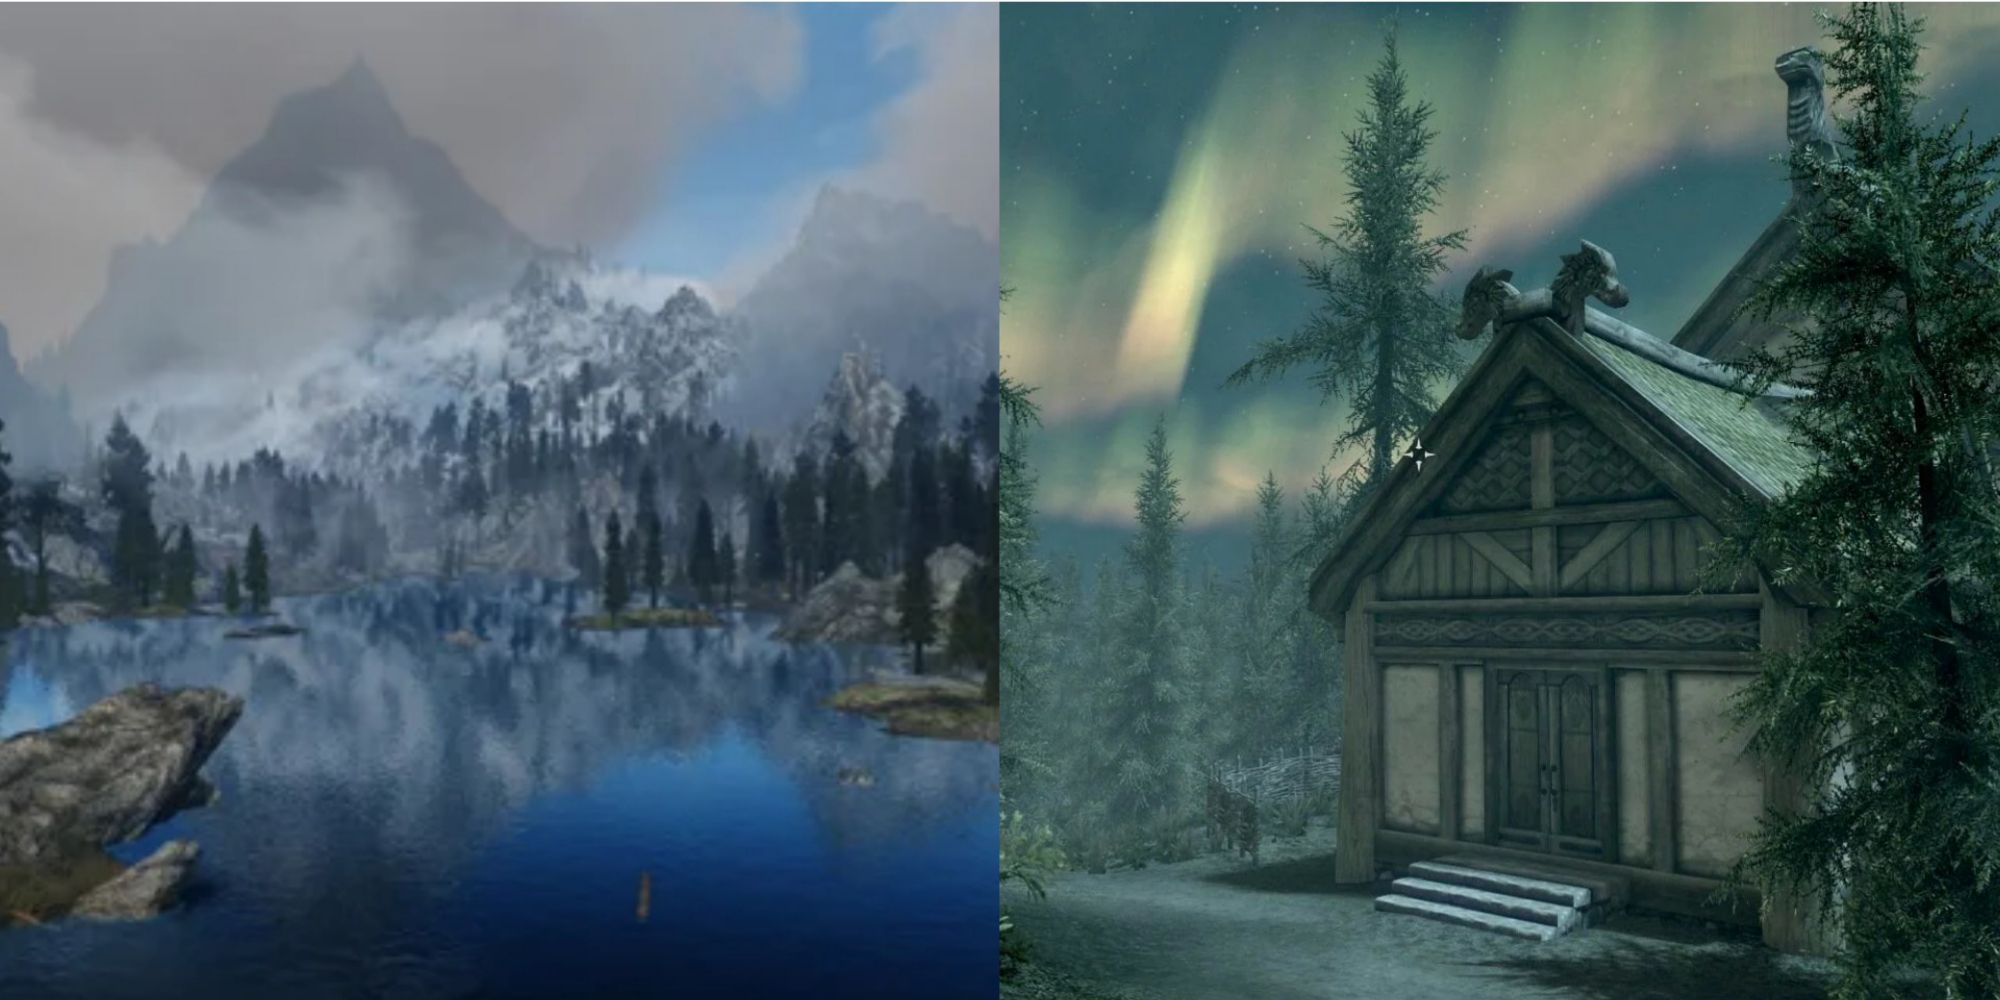 skyrim lakeview manor - View of Lake near the manor (left) and manor during the night-time (right)